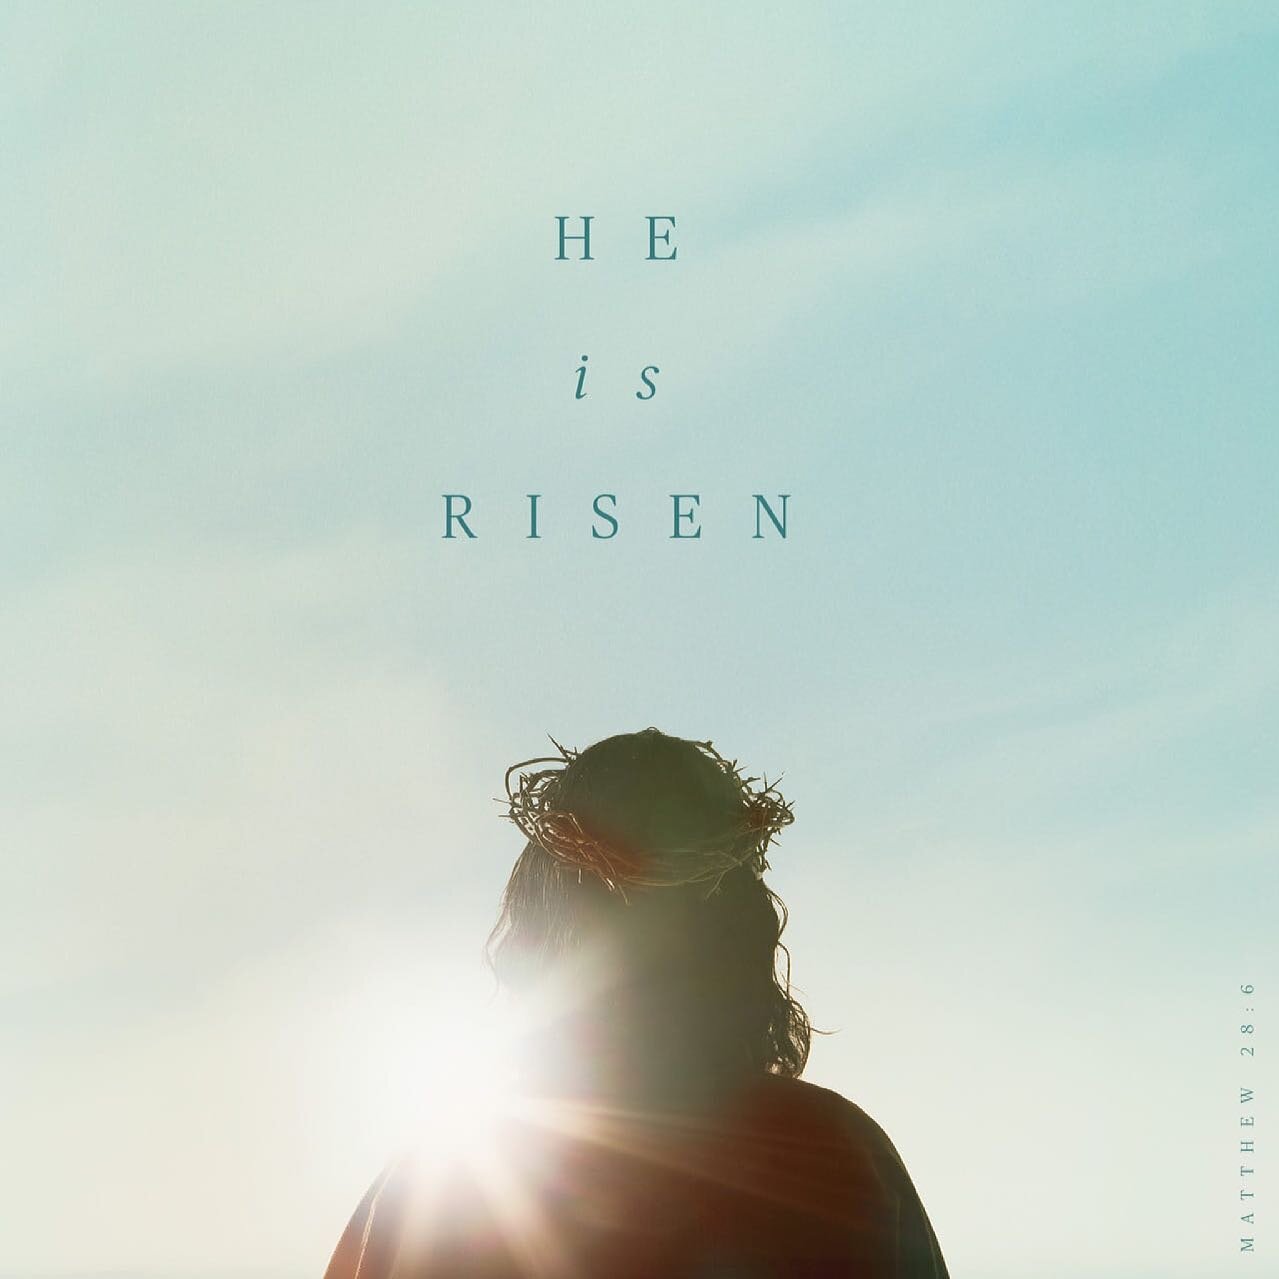 &ldquo;He isn&rsquo;t here! He is risen from the dead, just as he said would happen. Come, see where his body was lying.&rdquo; Matthew‬ ‭28:6‬ 
&bull;
&bull;
Thank you, Jesus! 🙏🏼🙌🏼❤️ Happy Easter, everyone!